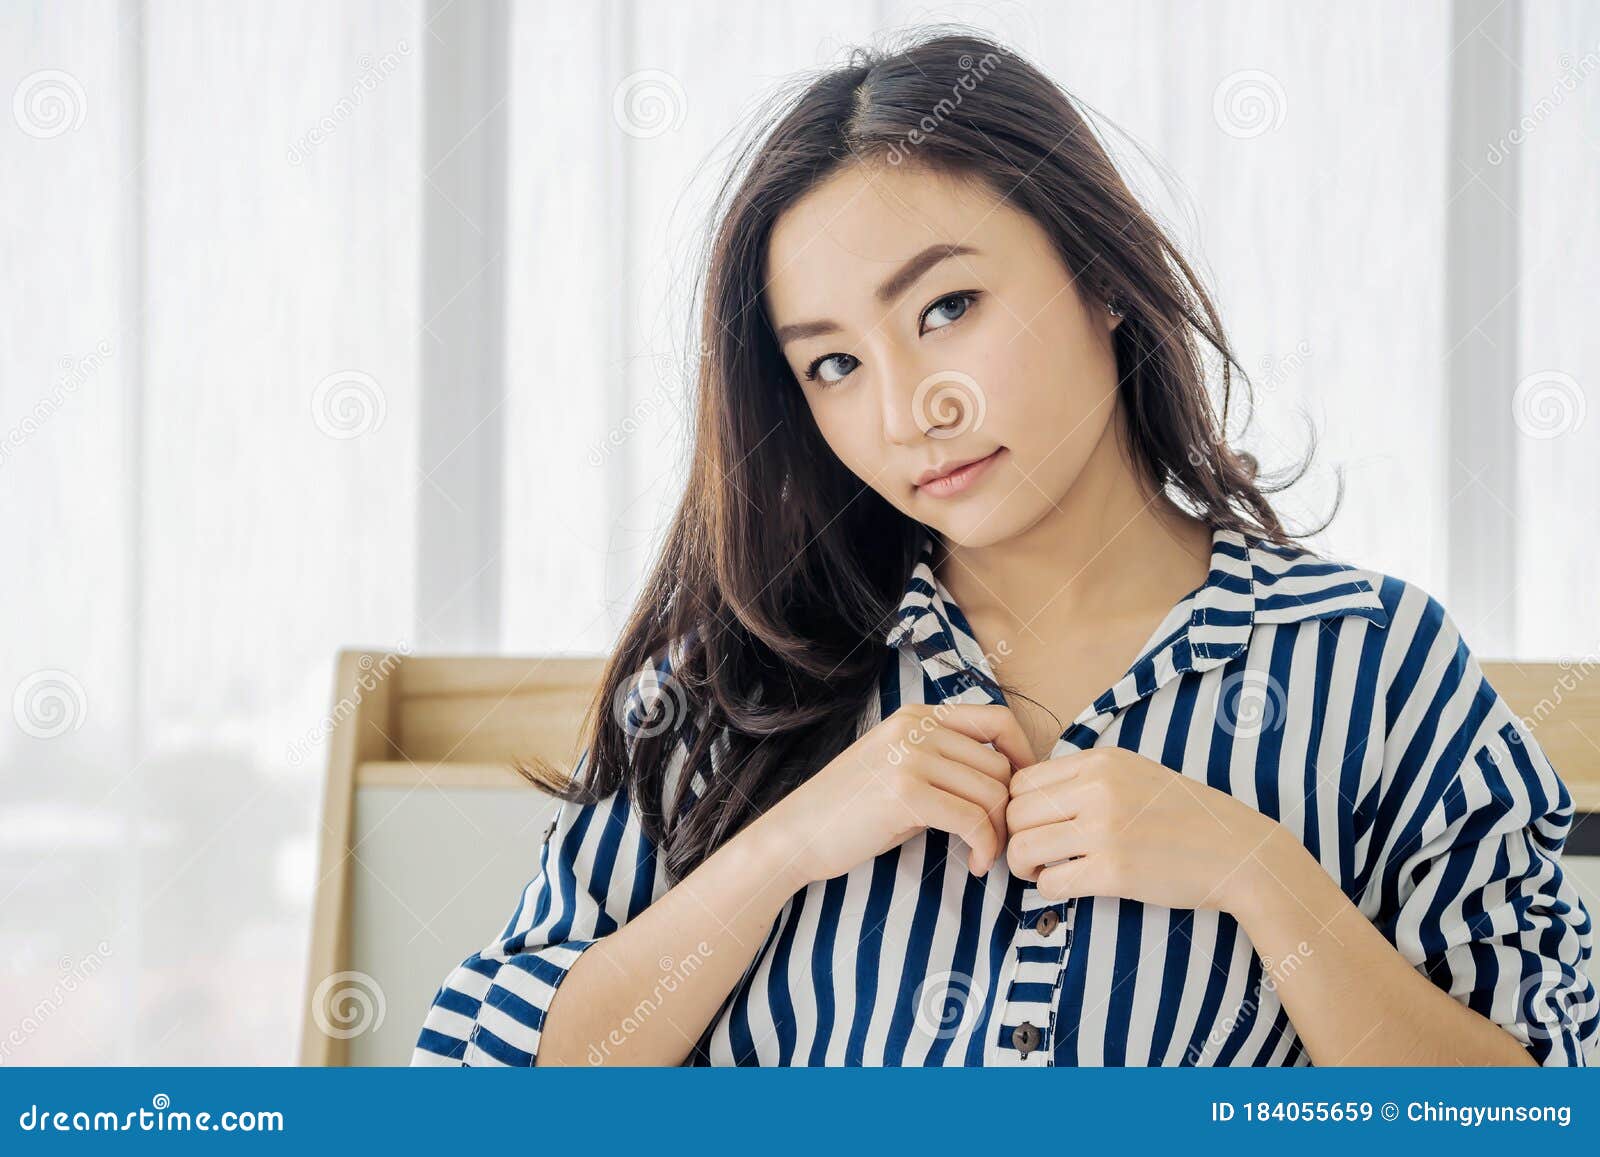 Images of Young Asian Woman Going To Take Off Shirts by Beginning To Remove the Buttons To Begin Pleasure, Sex Concept Stock Image